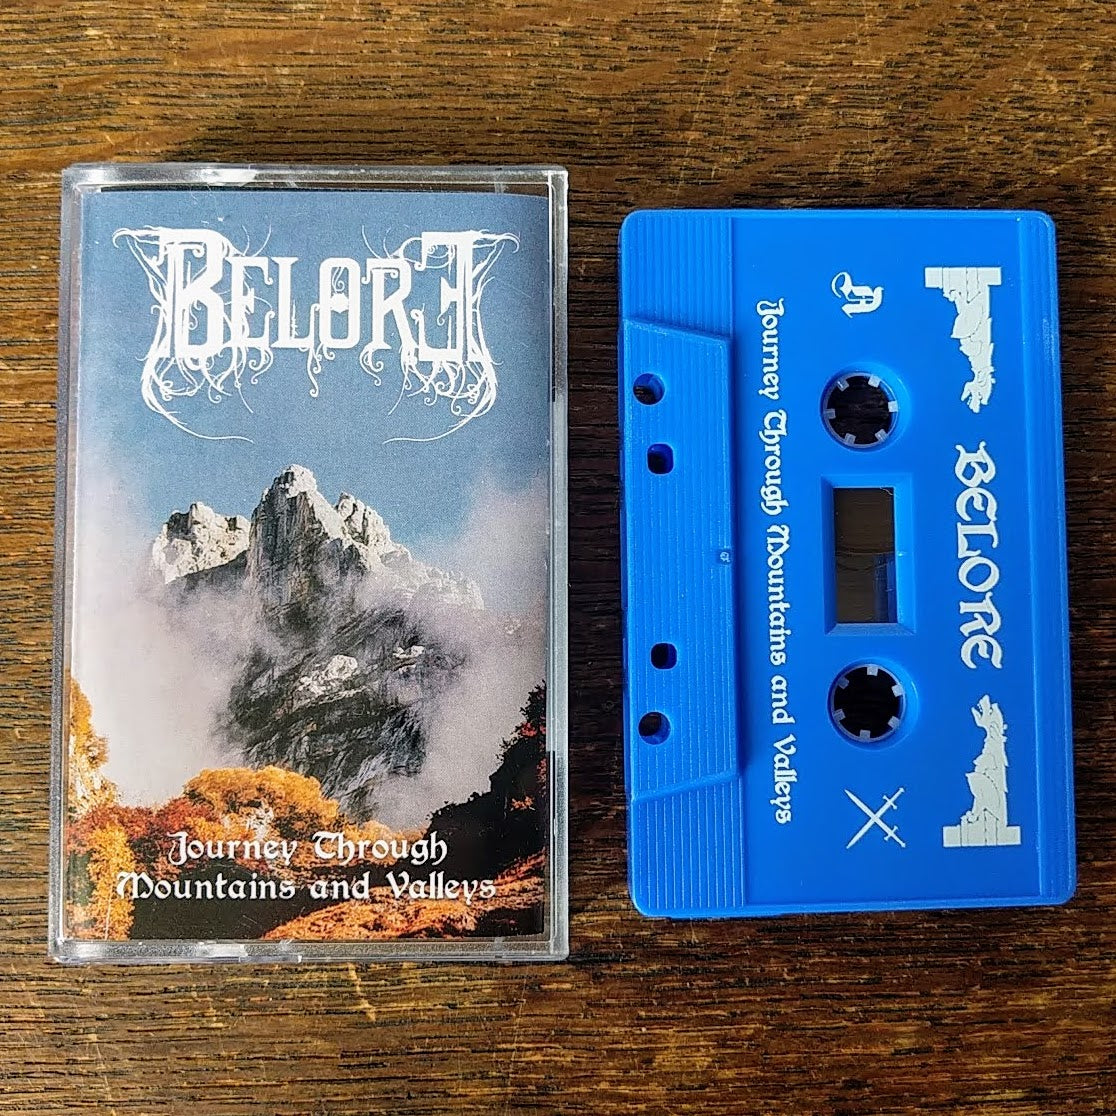 [SOLD OUT] BELORE "Journey Through Mountains and Valleys" Cassette Tape (Lim. 100)